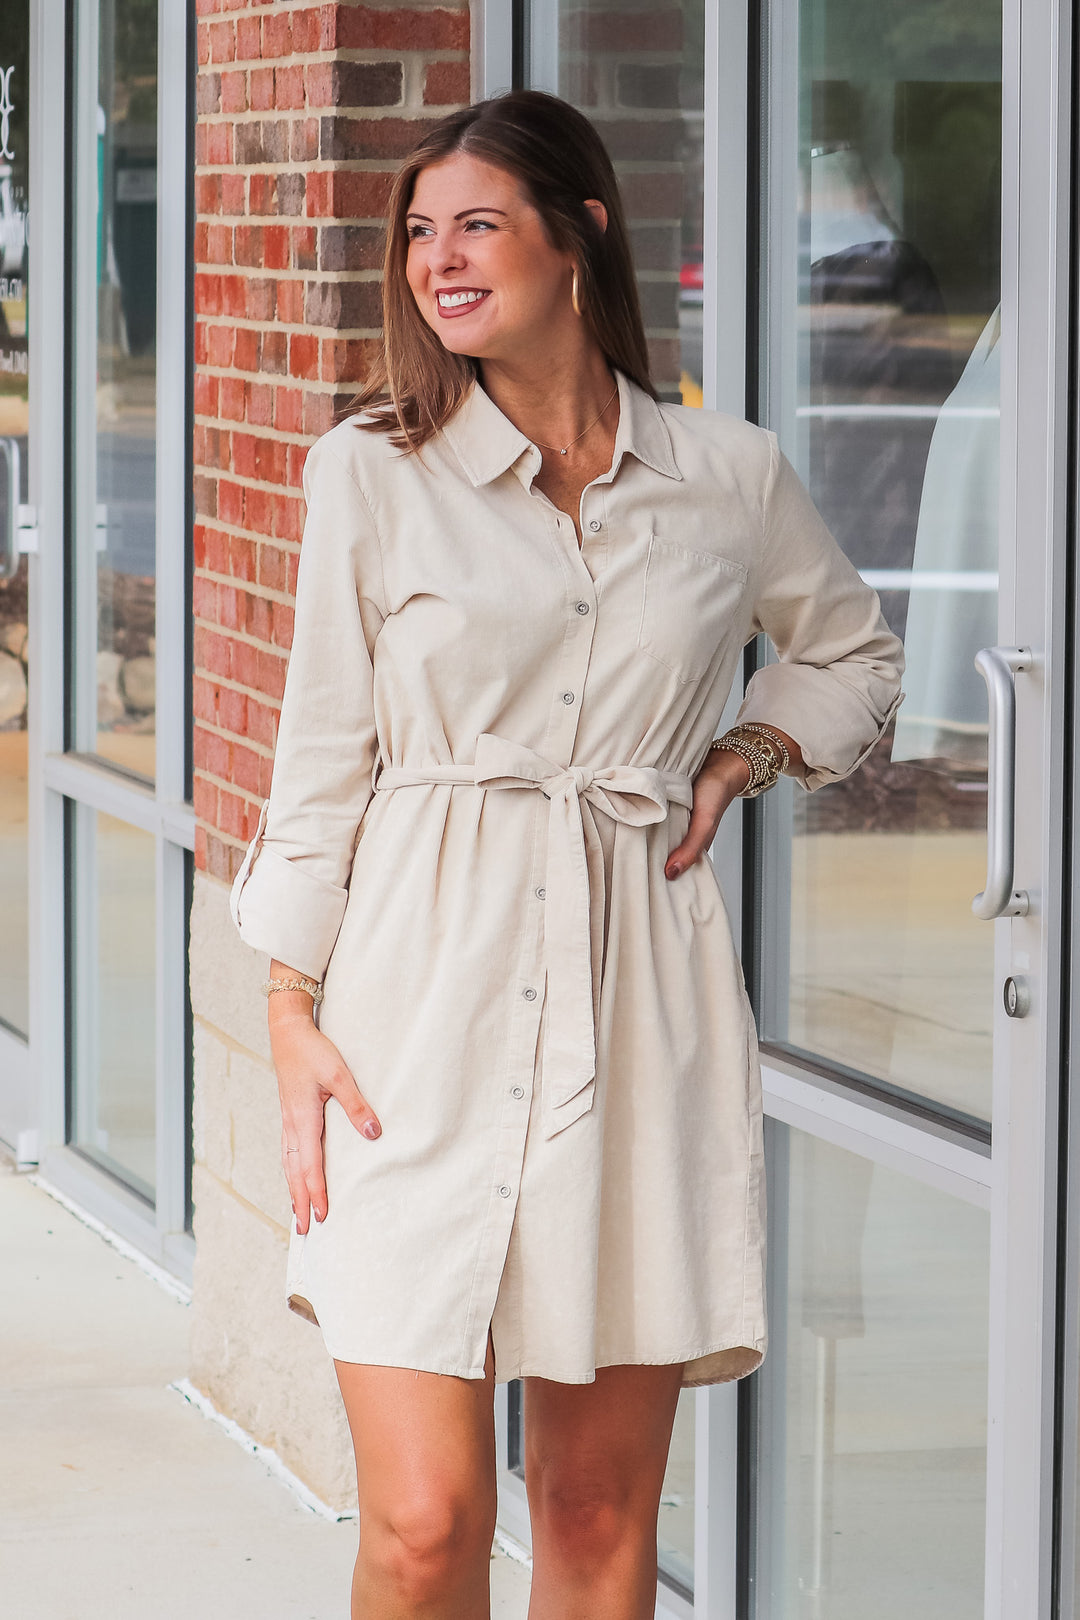 A brunette woman wearing a tan corduroy shirt dress with a tie belt. She is standing in front of a shop.